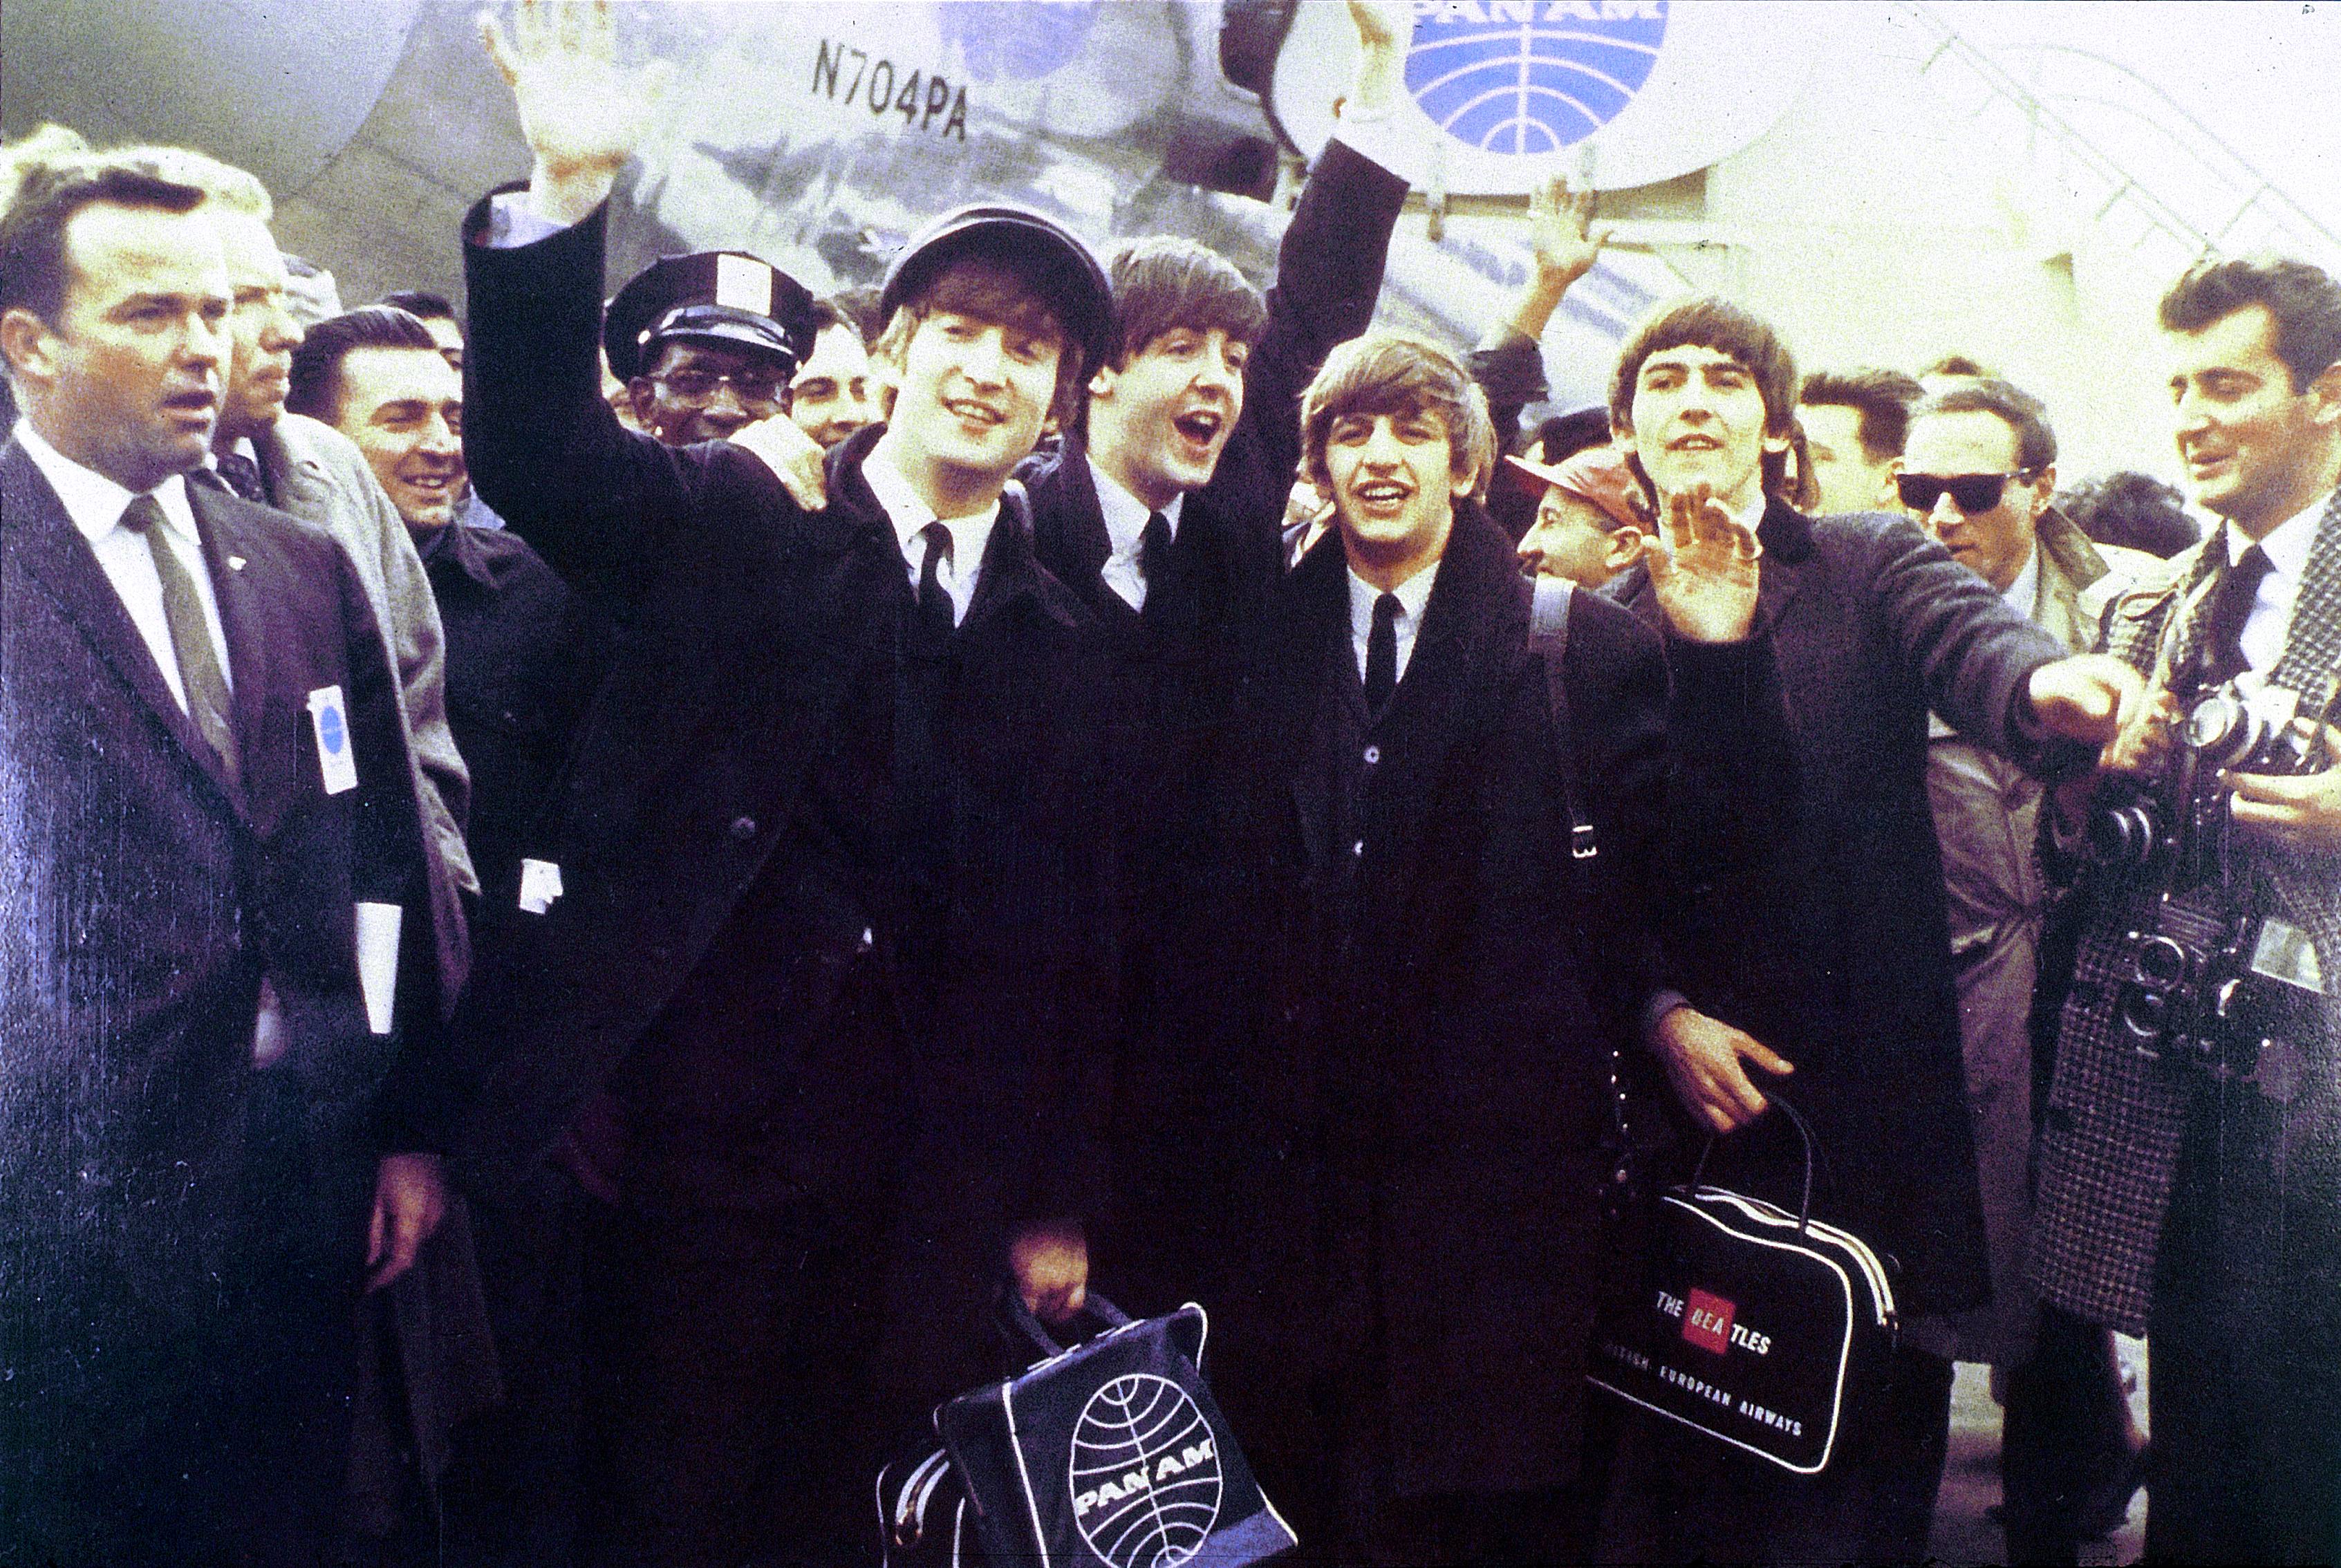 The Beatles arrive at Kennedy Airport in Feb. 1964 